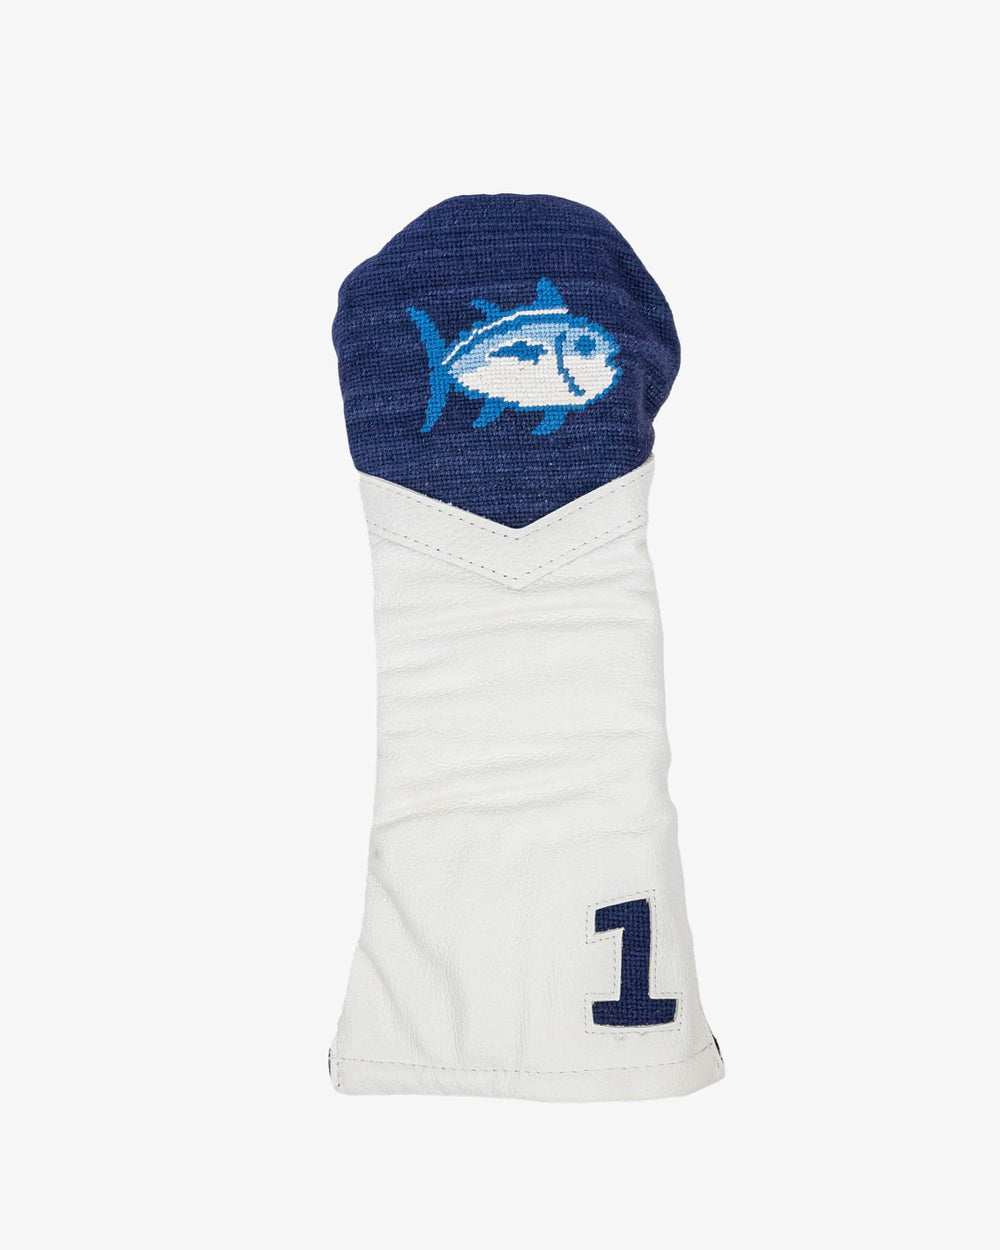 The front view of the Southern Tide Skipjack Driver Head Cover by Southern Tide - Navy